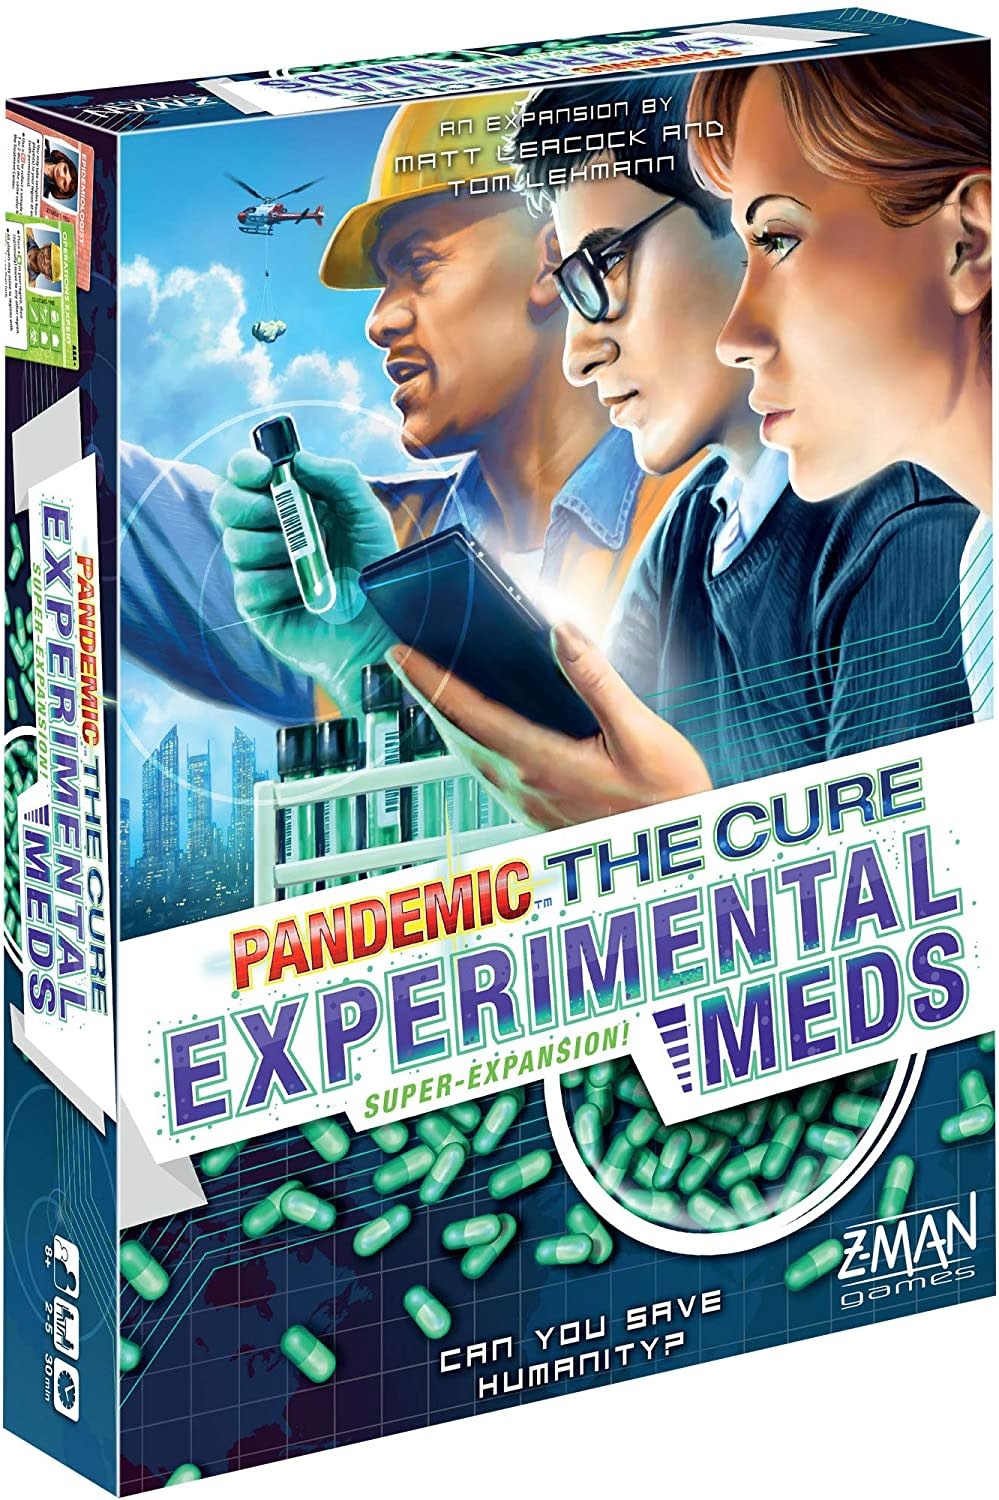 Pandemic: The Cure - Experimental Meds